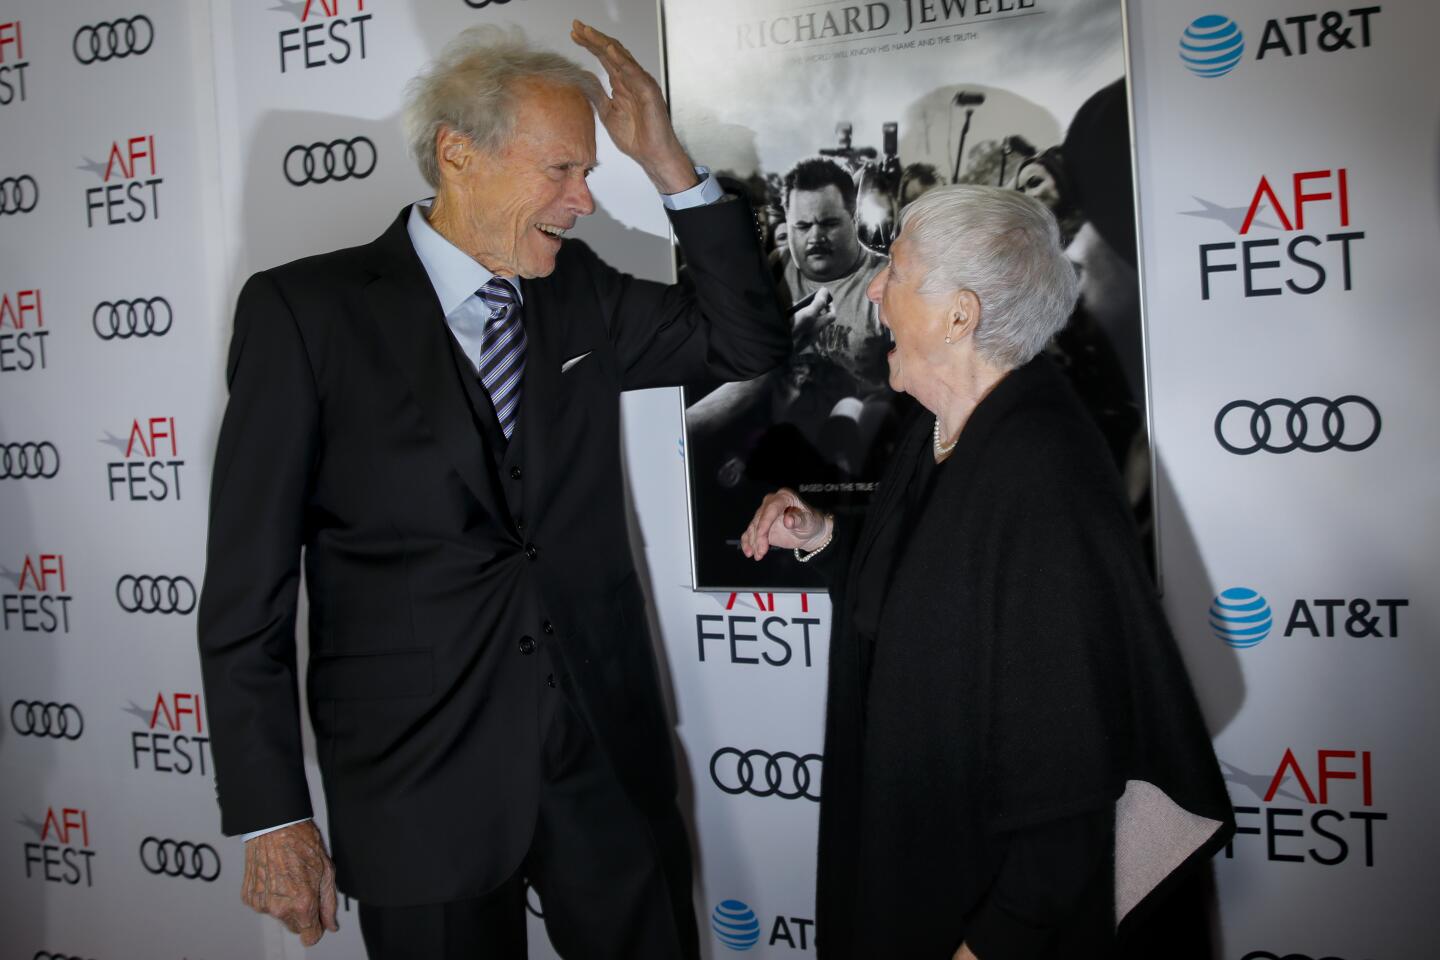 HOLLYWOOD, CA --NOVEMBER 20, 2019—Director Clint Eastwood, with Bobi Jewell, on the red carpet for the premiere of his new film, “Richard Jewell,” during AFI FEST 2019, at the TCL Chinese Theatre, in Hollywood, CA, Nov 20, 2019. Bobi is the mother of Richard Jewell, the man accused of the bombing during the 1996 Summer Olympics in Atlanta. (Jay L. Clendenin / Los Angeles Times)